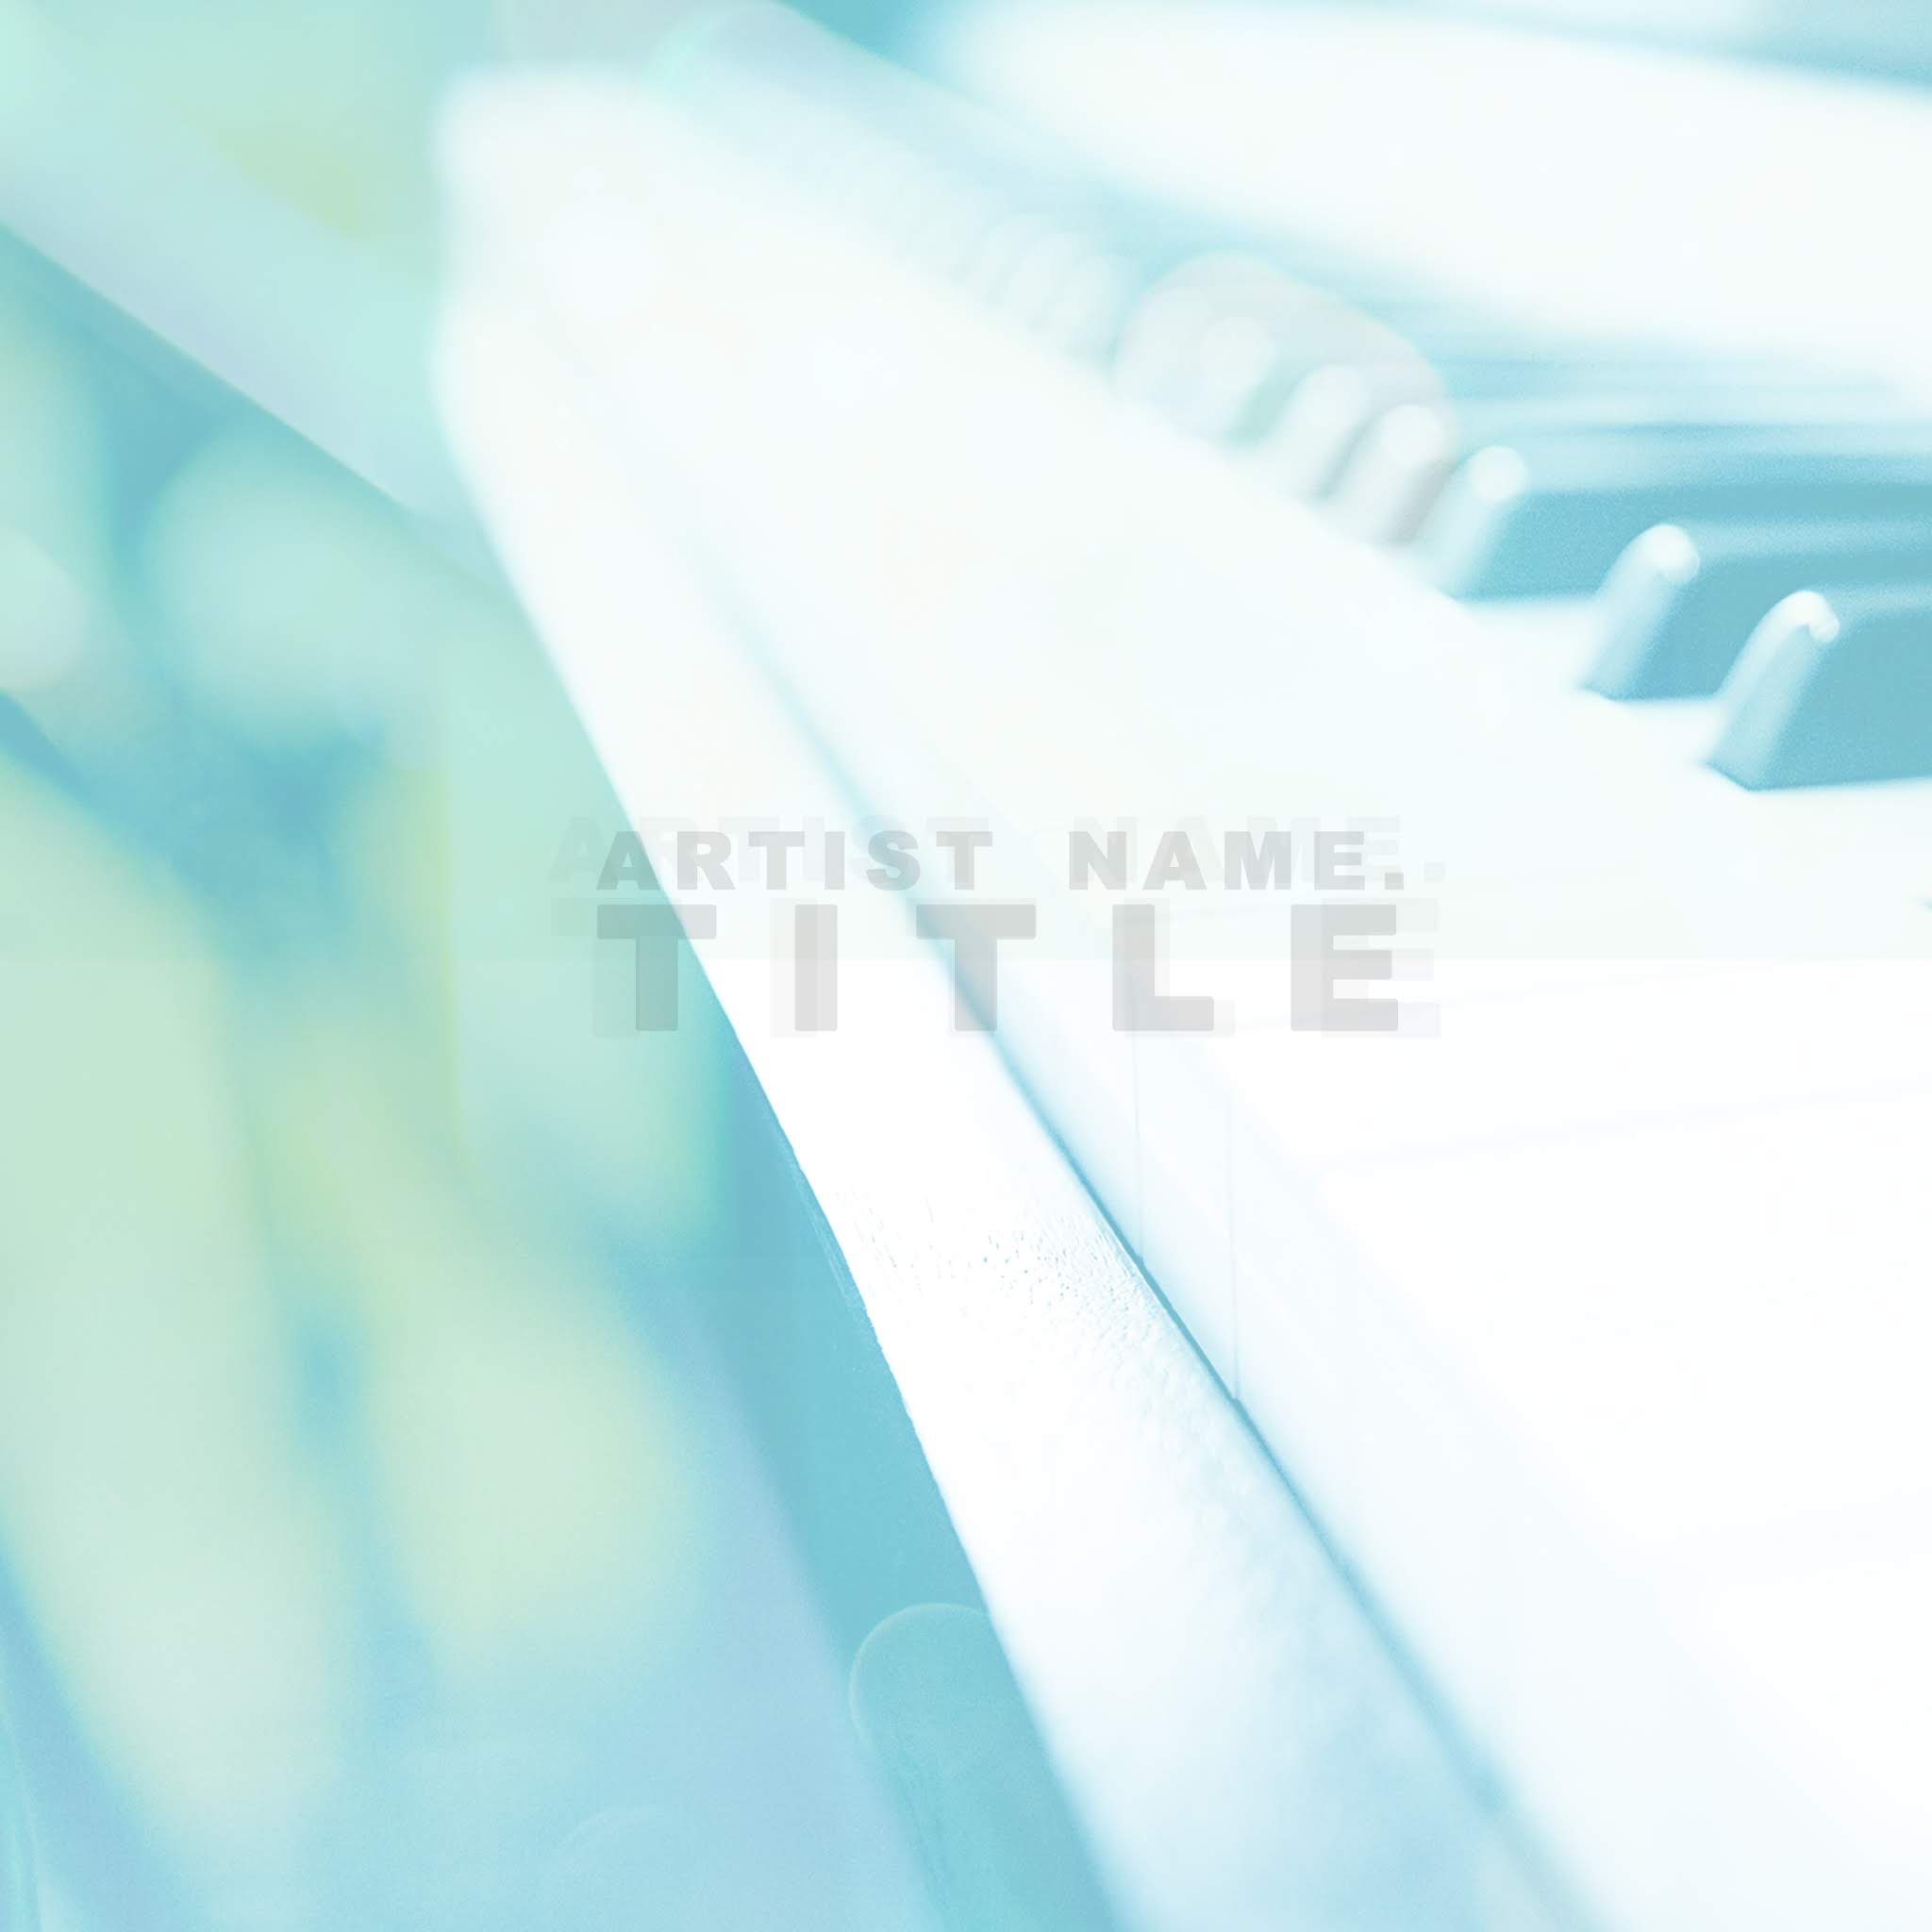 This bright colored white and blue CD cover template will make your music release look and feel more appealing. It's got a compelling and stylish 3D layout that will get fans interested in your music release whether you are distributing physical CDs online or in stores, or releasing your music digitally on Spotify, iTunes, Bandcamp, Soundcloud, CD Baby or Google Play Music. Background picture: Piano